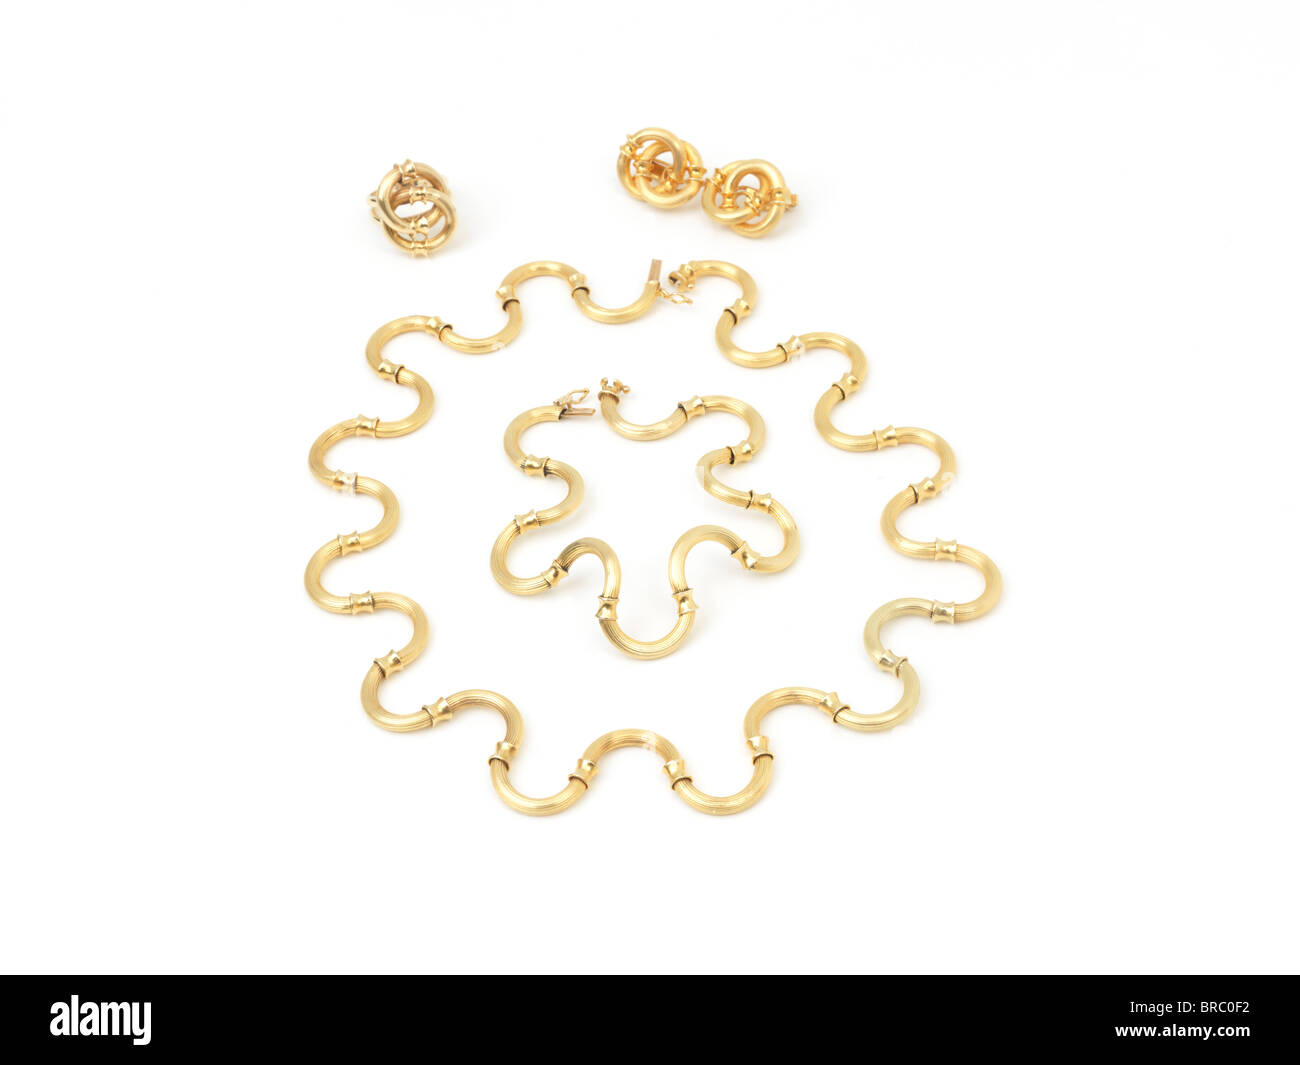 Gold Necklace, Gold Bracelet And Earrings Stock Photo